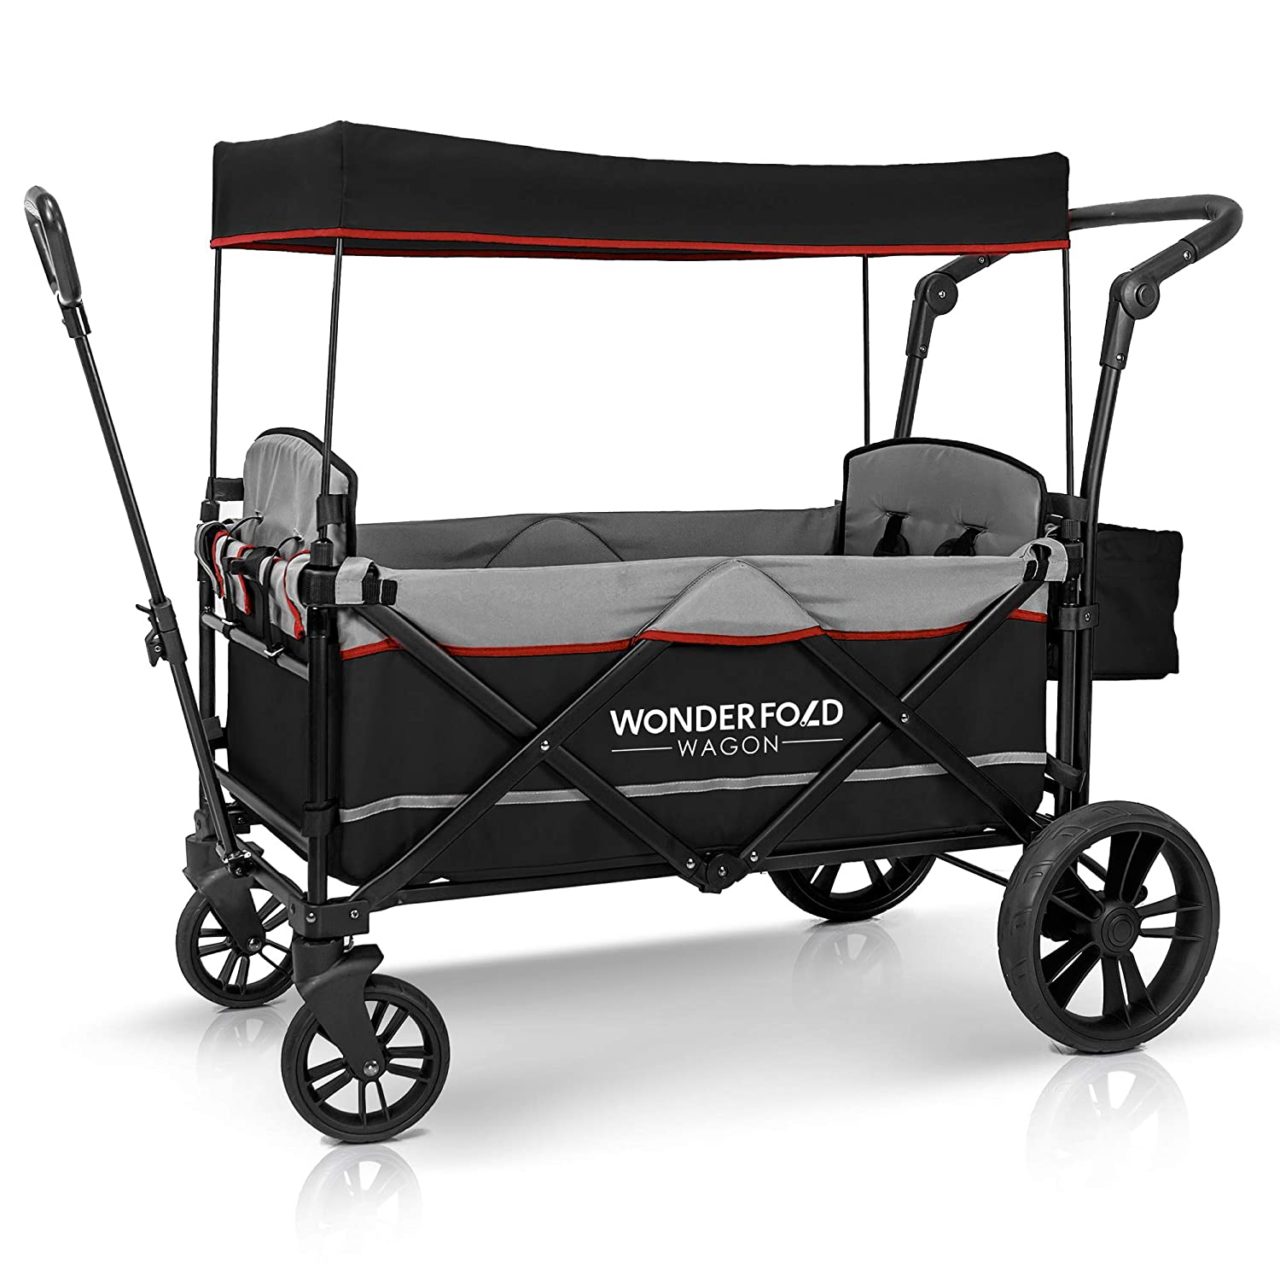 Best Baby Stroller Wagons: Double & Single Options - New Parent Advice